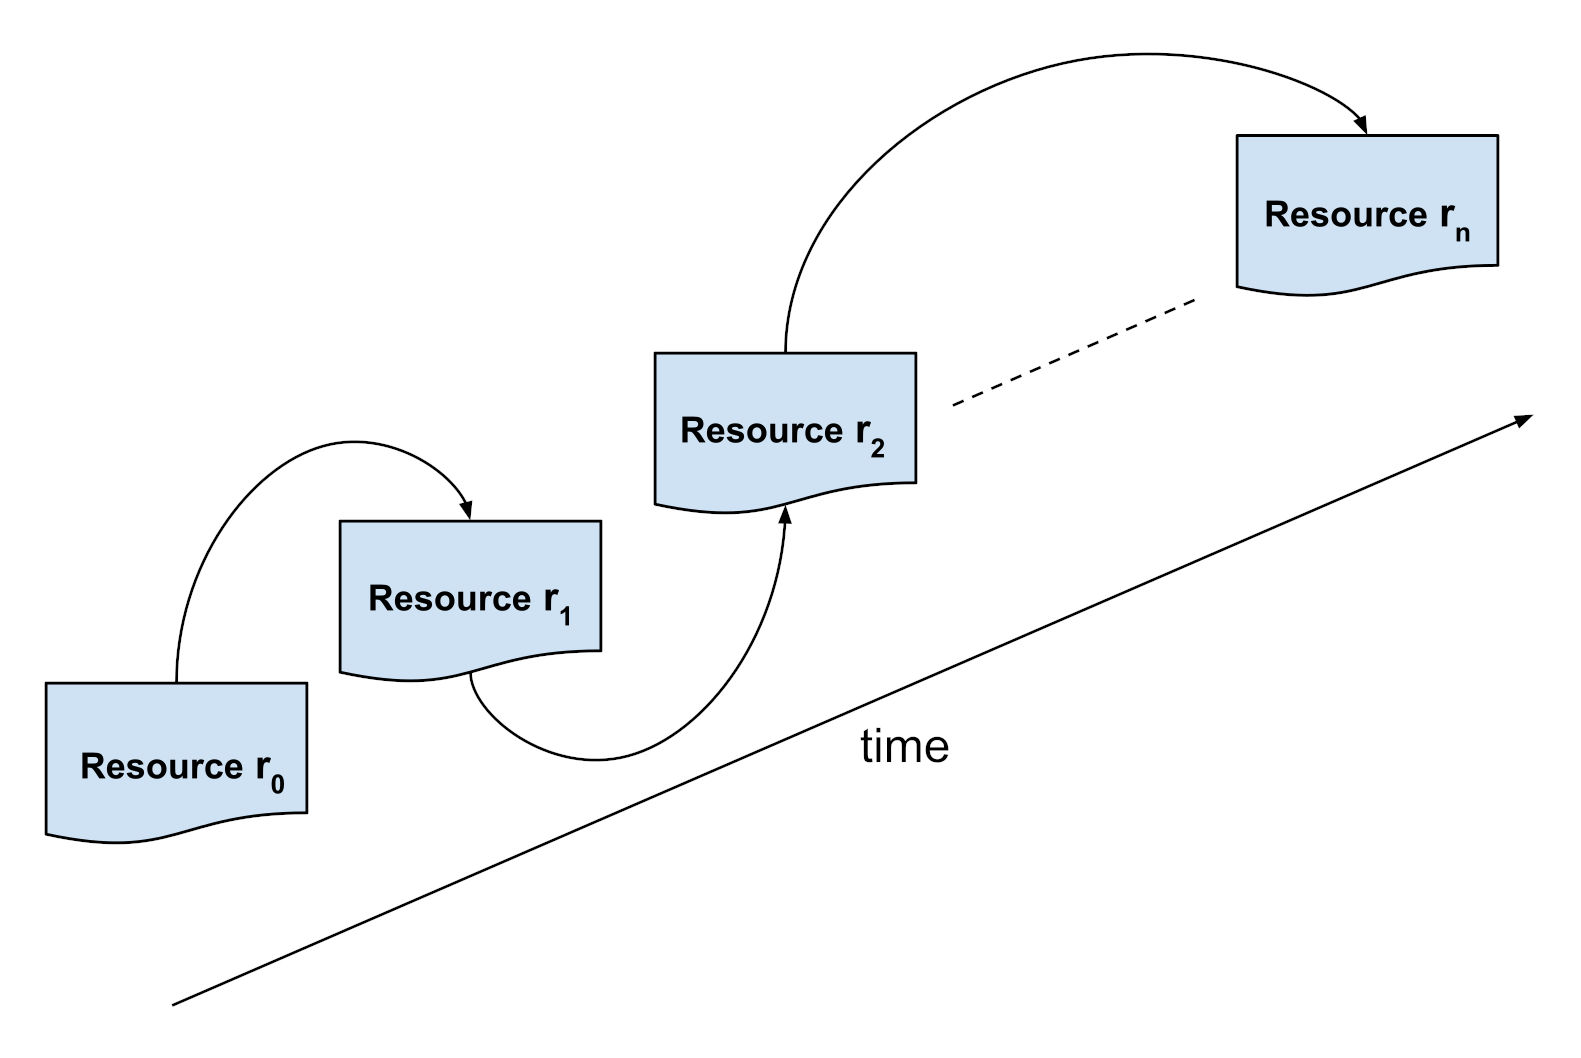 Shows steps of change from resource r0 to resource rn over
                        time.